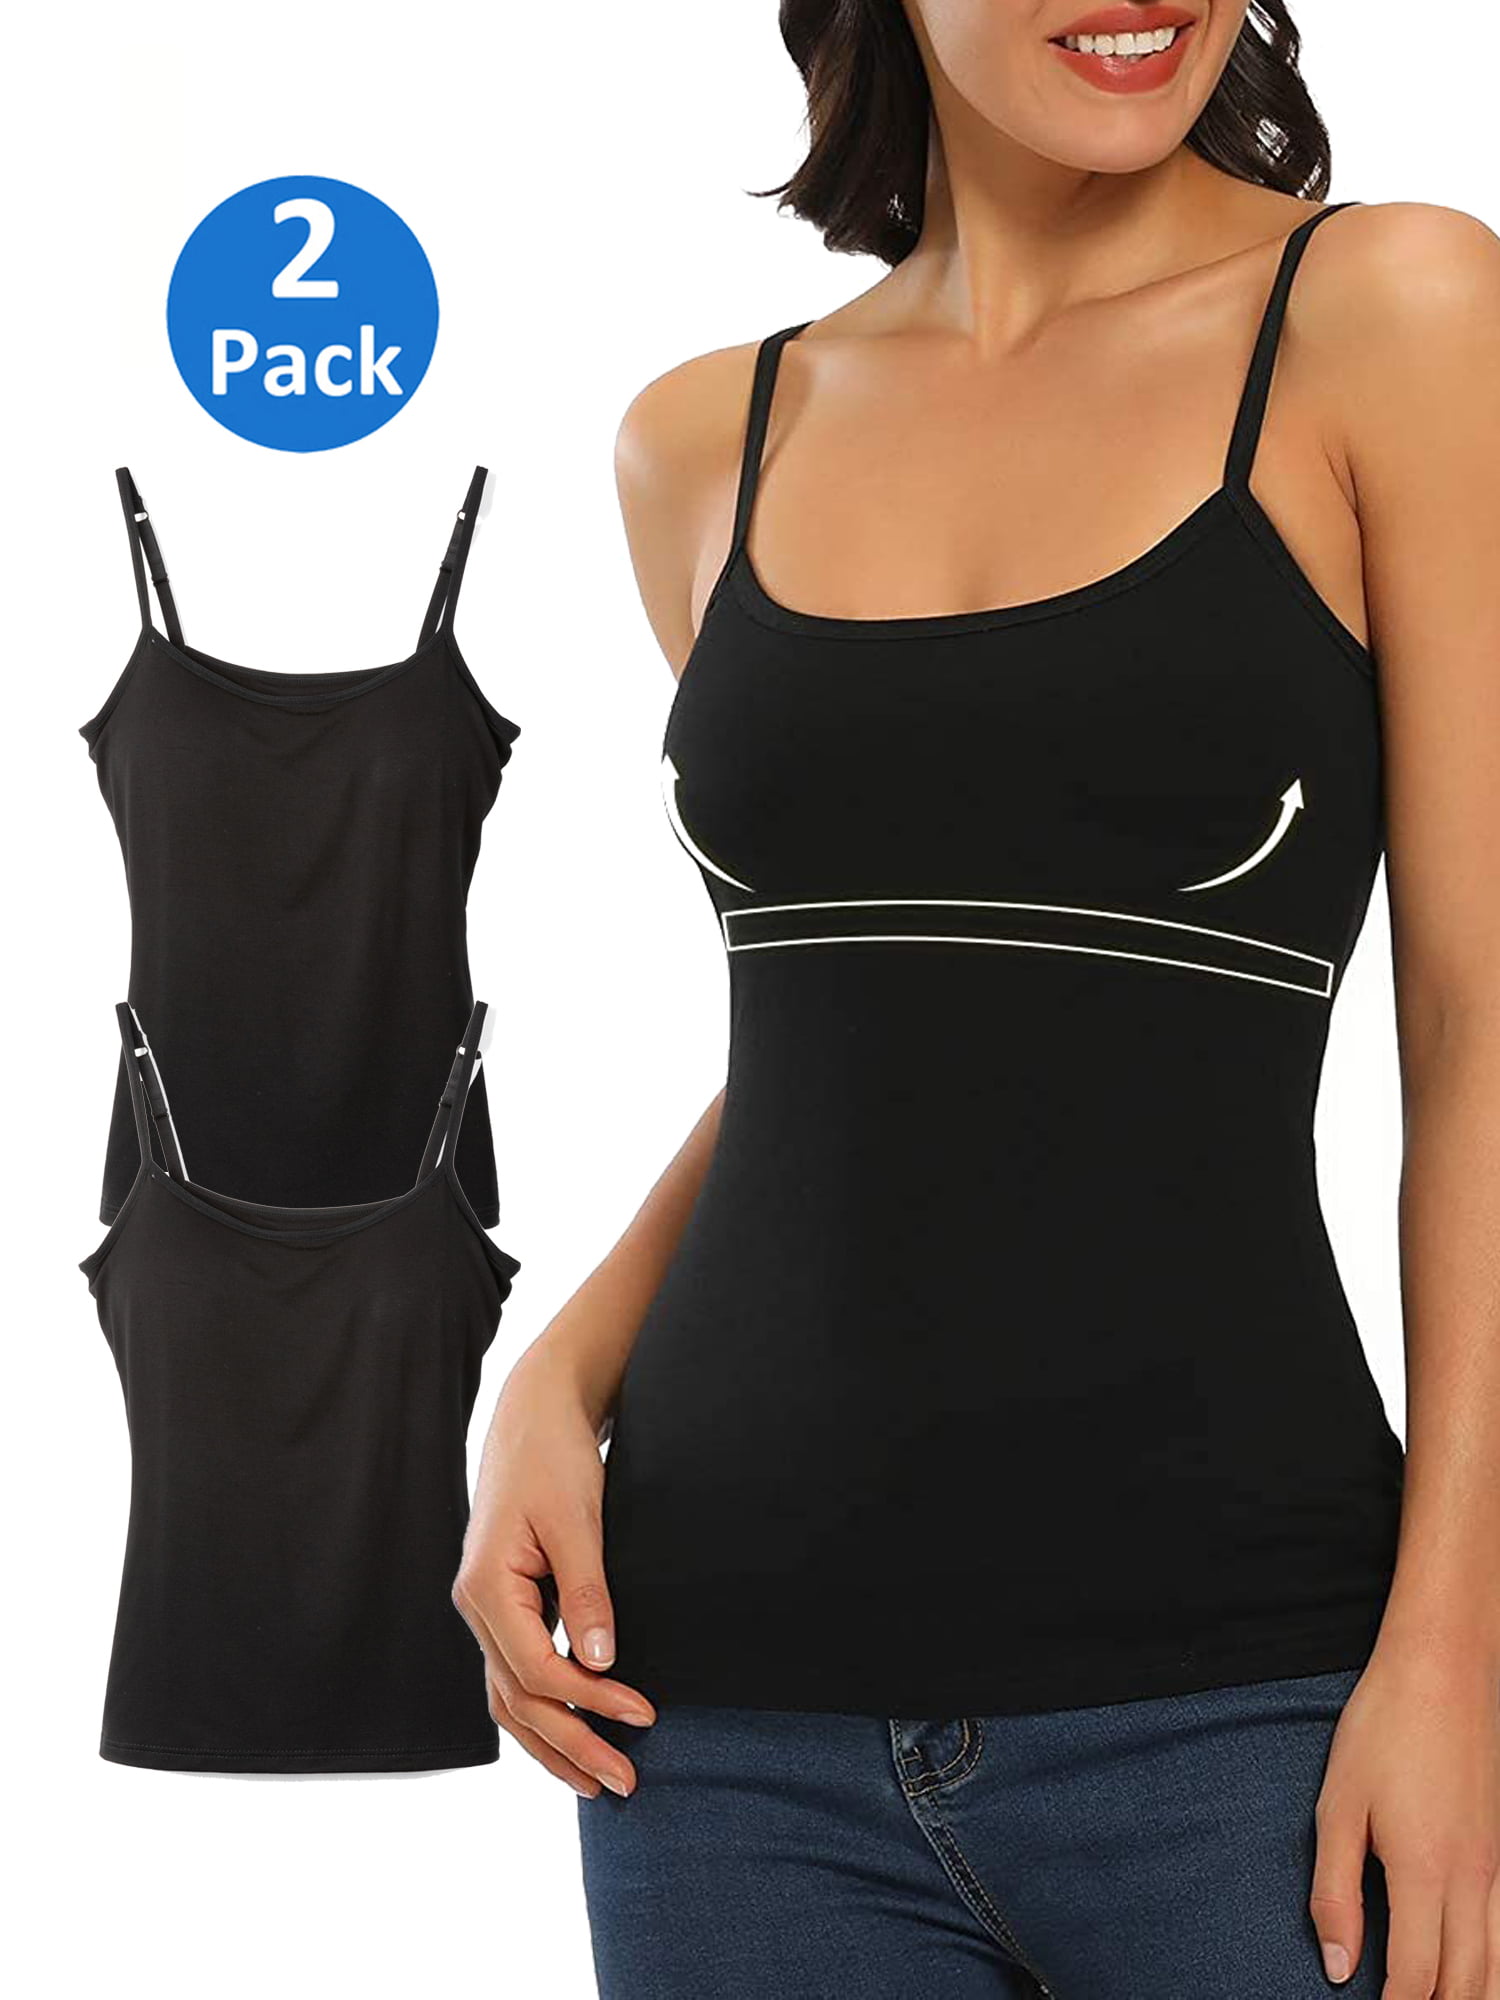 Womens Tank Tops Adjustable Strap Camisole with Built in Padded Bra Vest Cami Sleeveless Layer Top for Winter